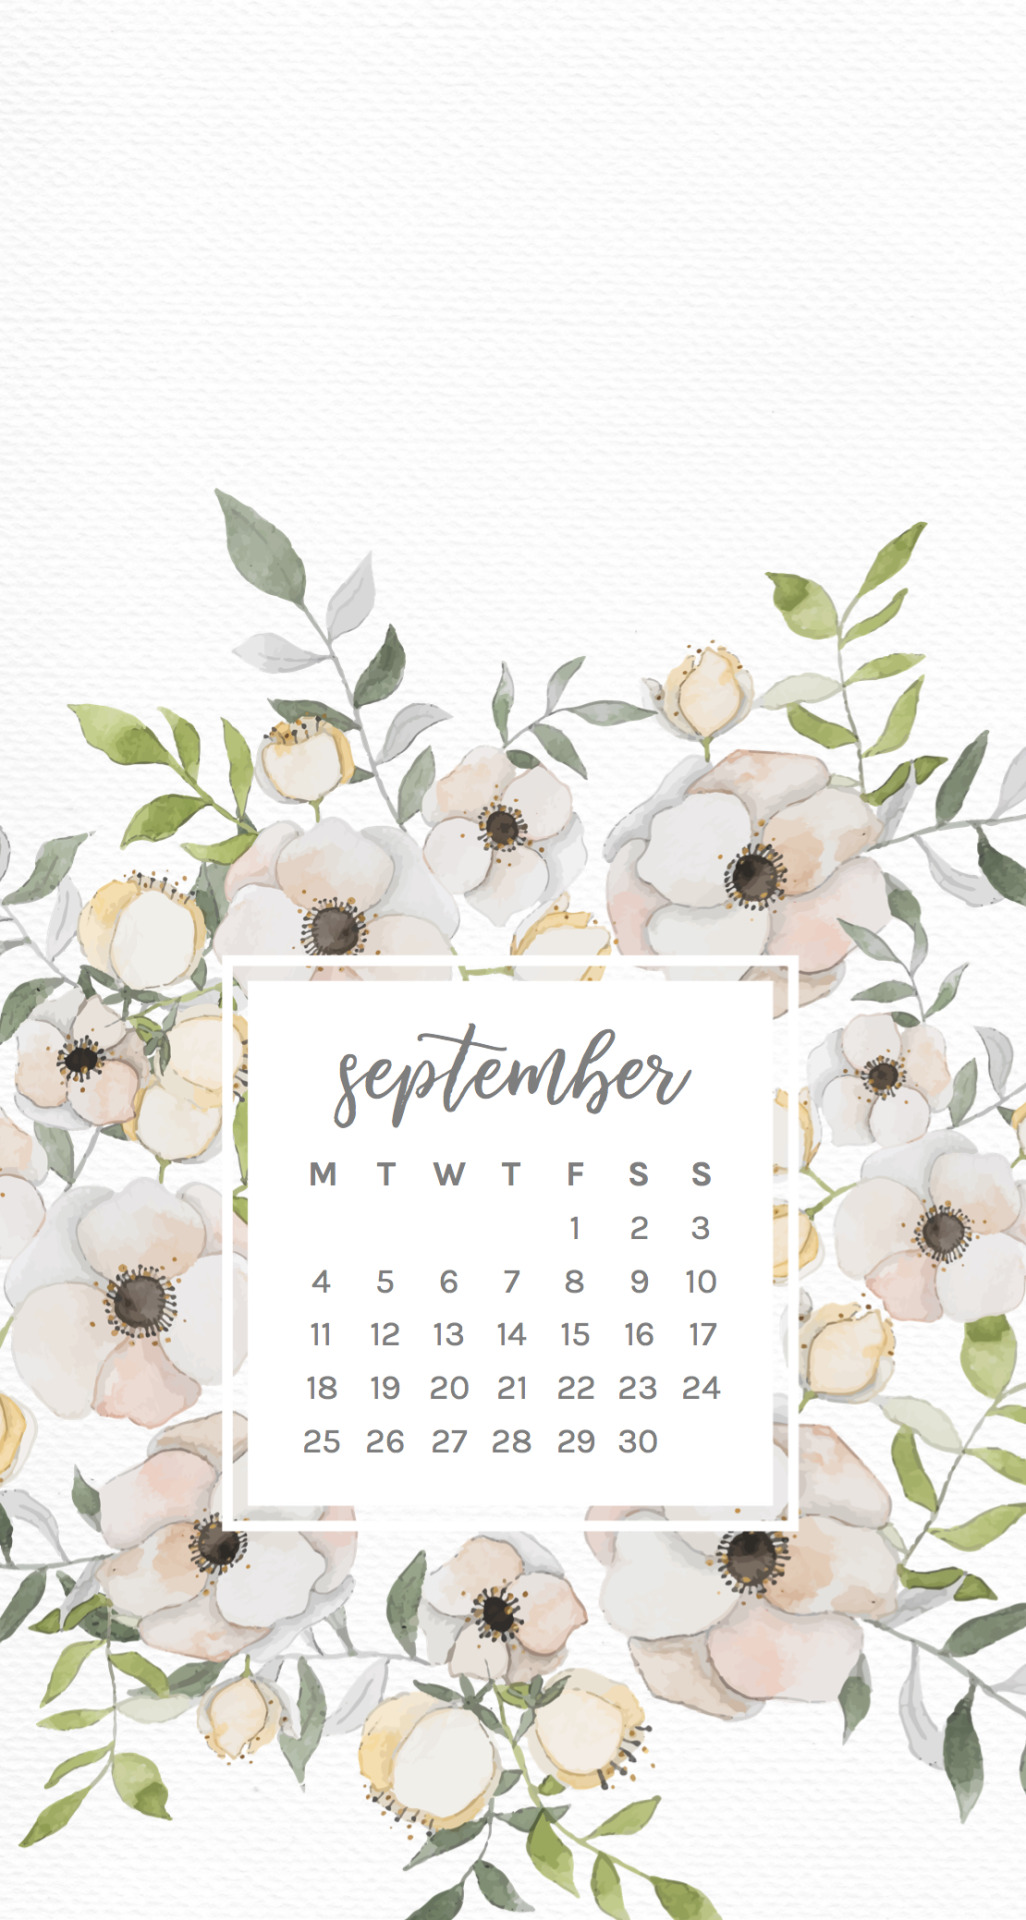 Emma S Studyblr September Floral Phone Wallpaper Here Are Some